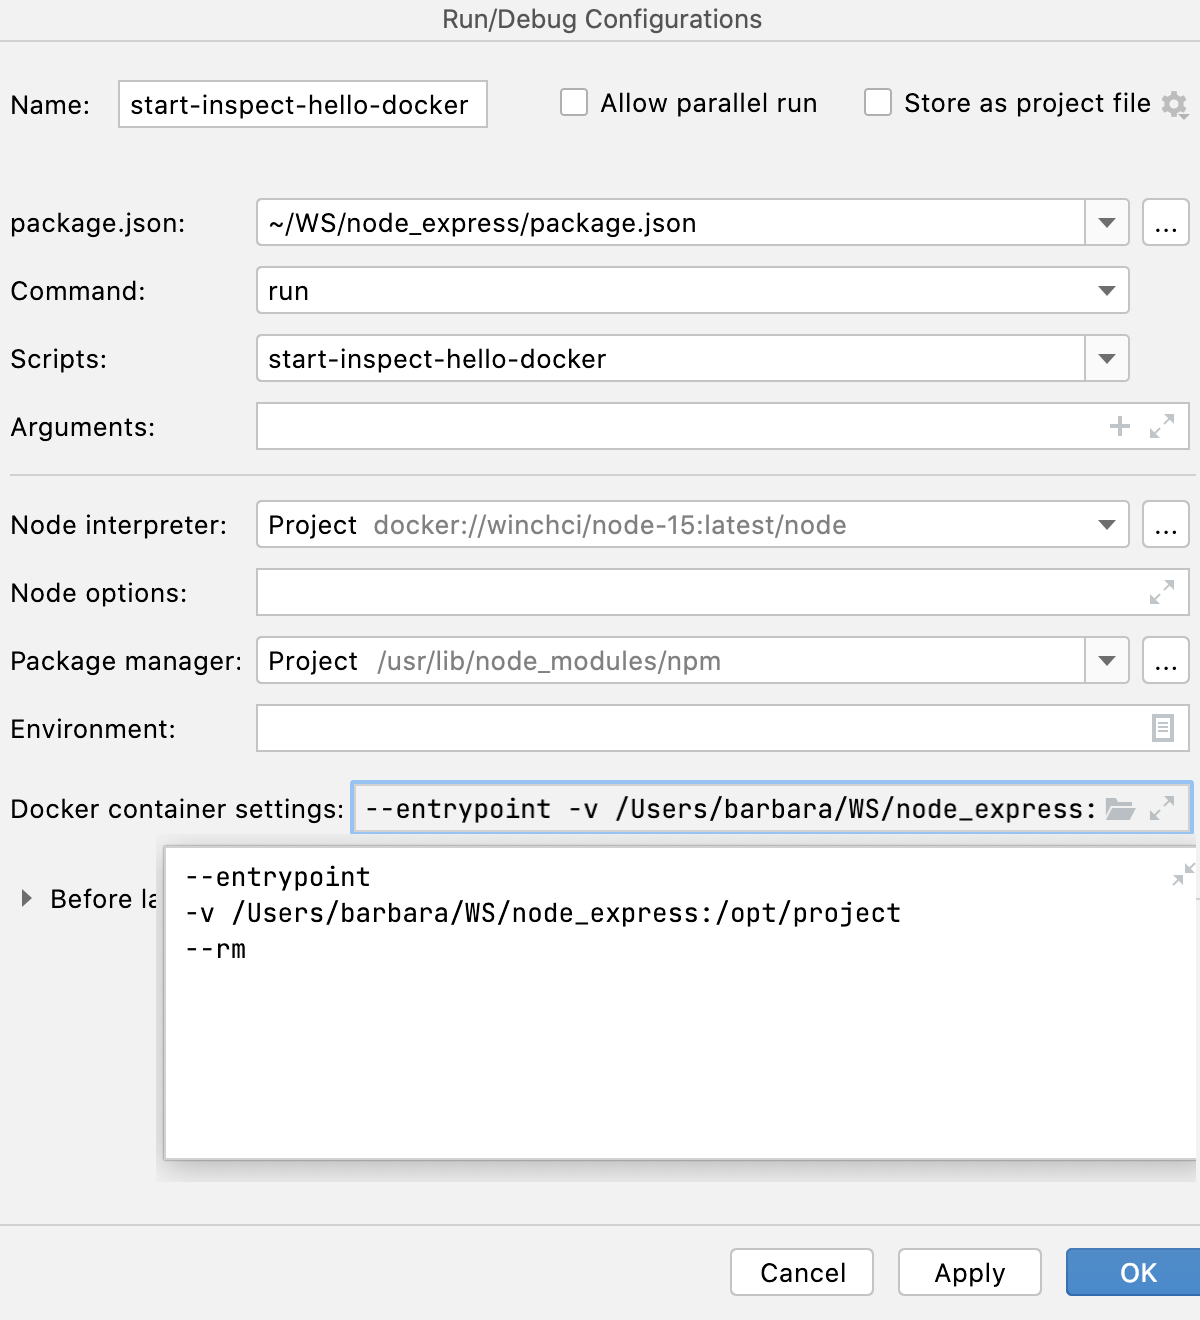 Check Docker container settings